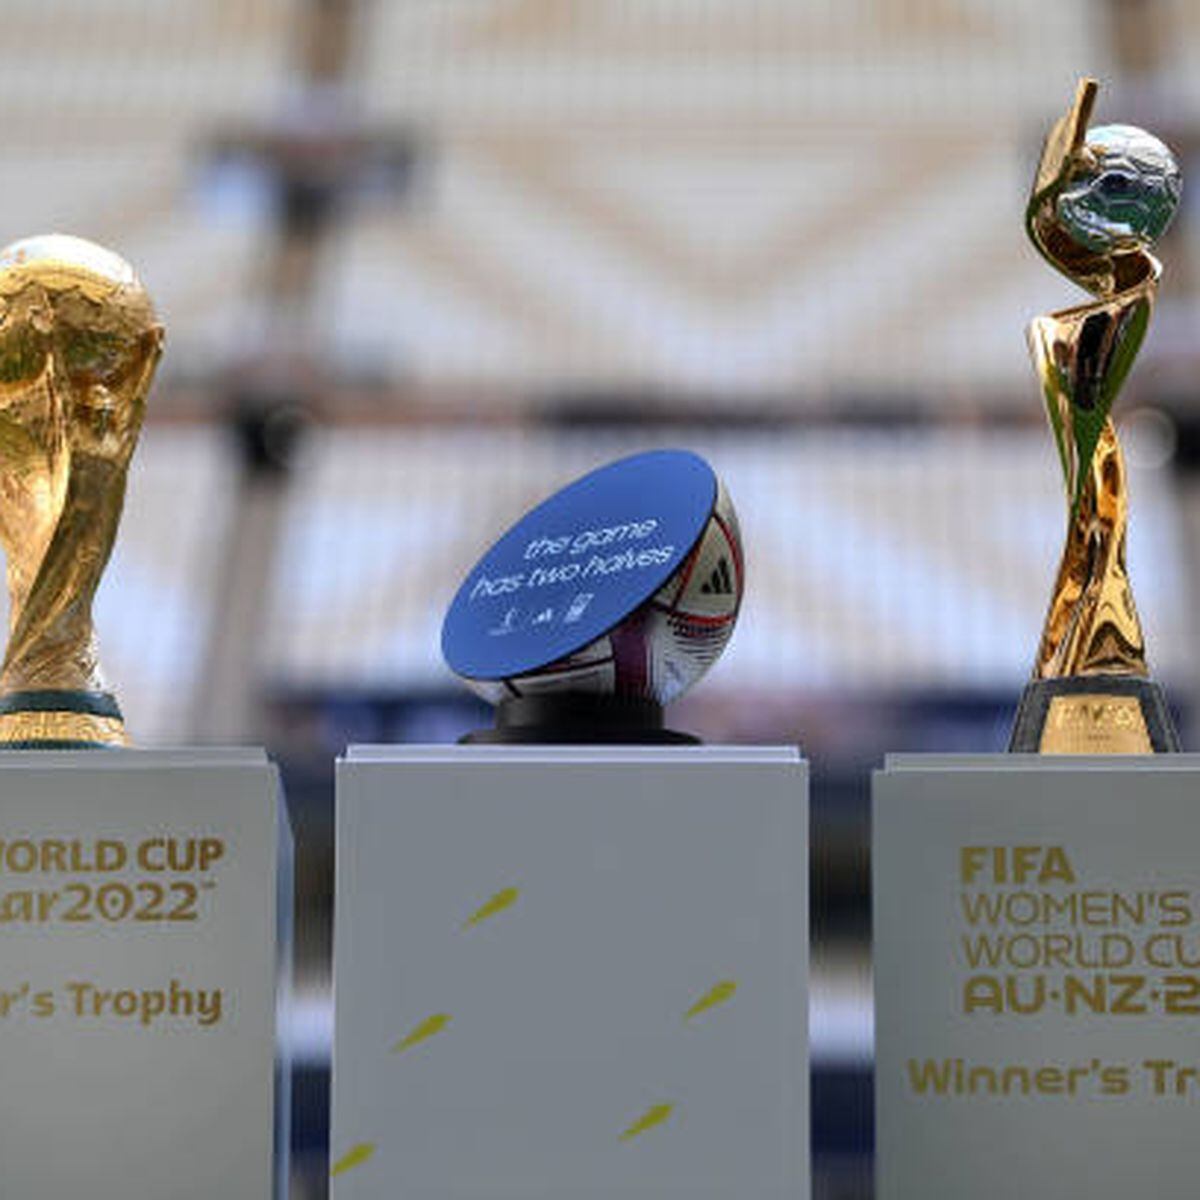 FIFA World Cup history: Past winners, runners-up, leading